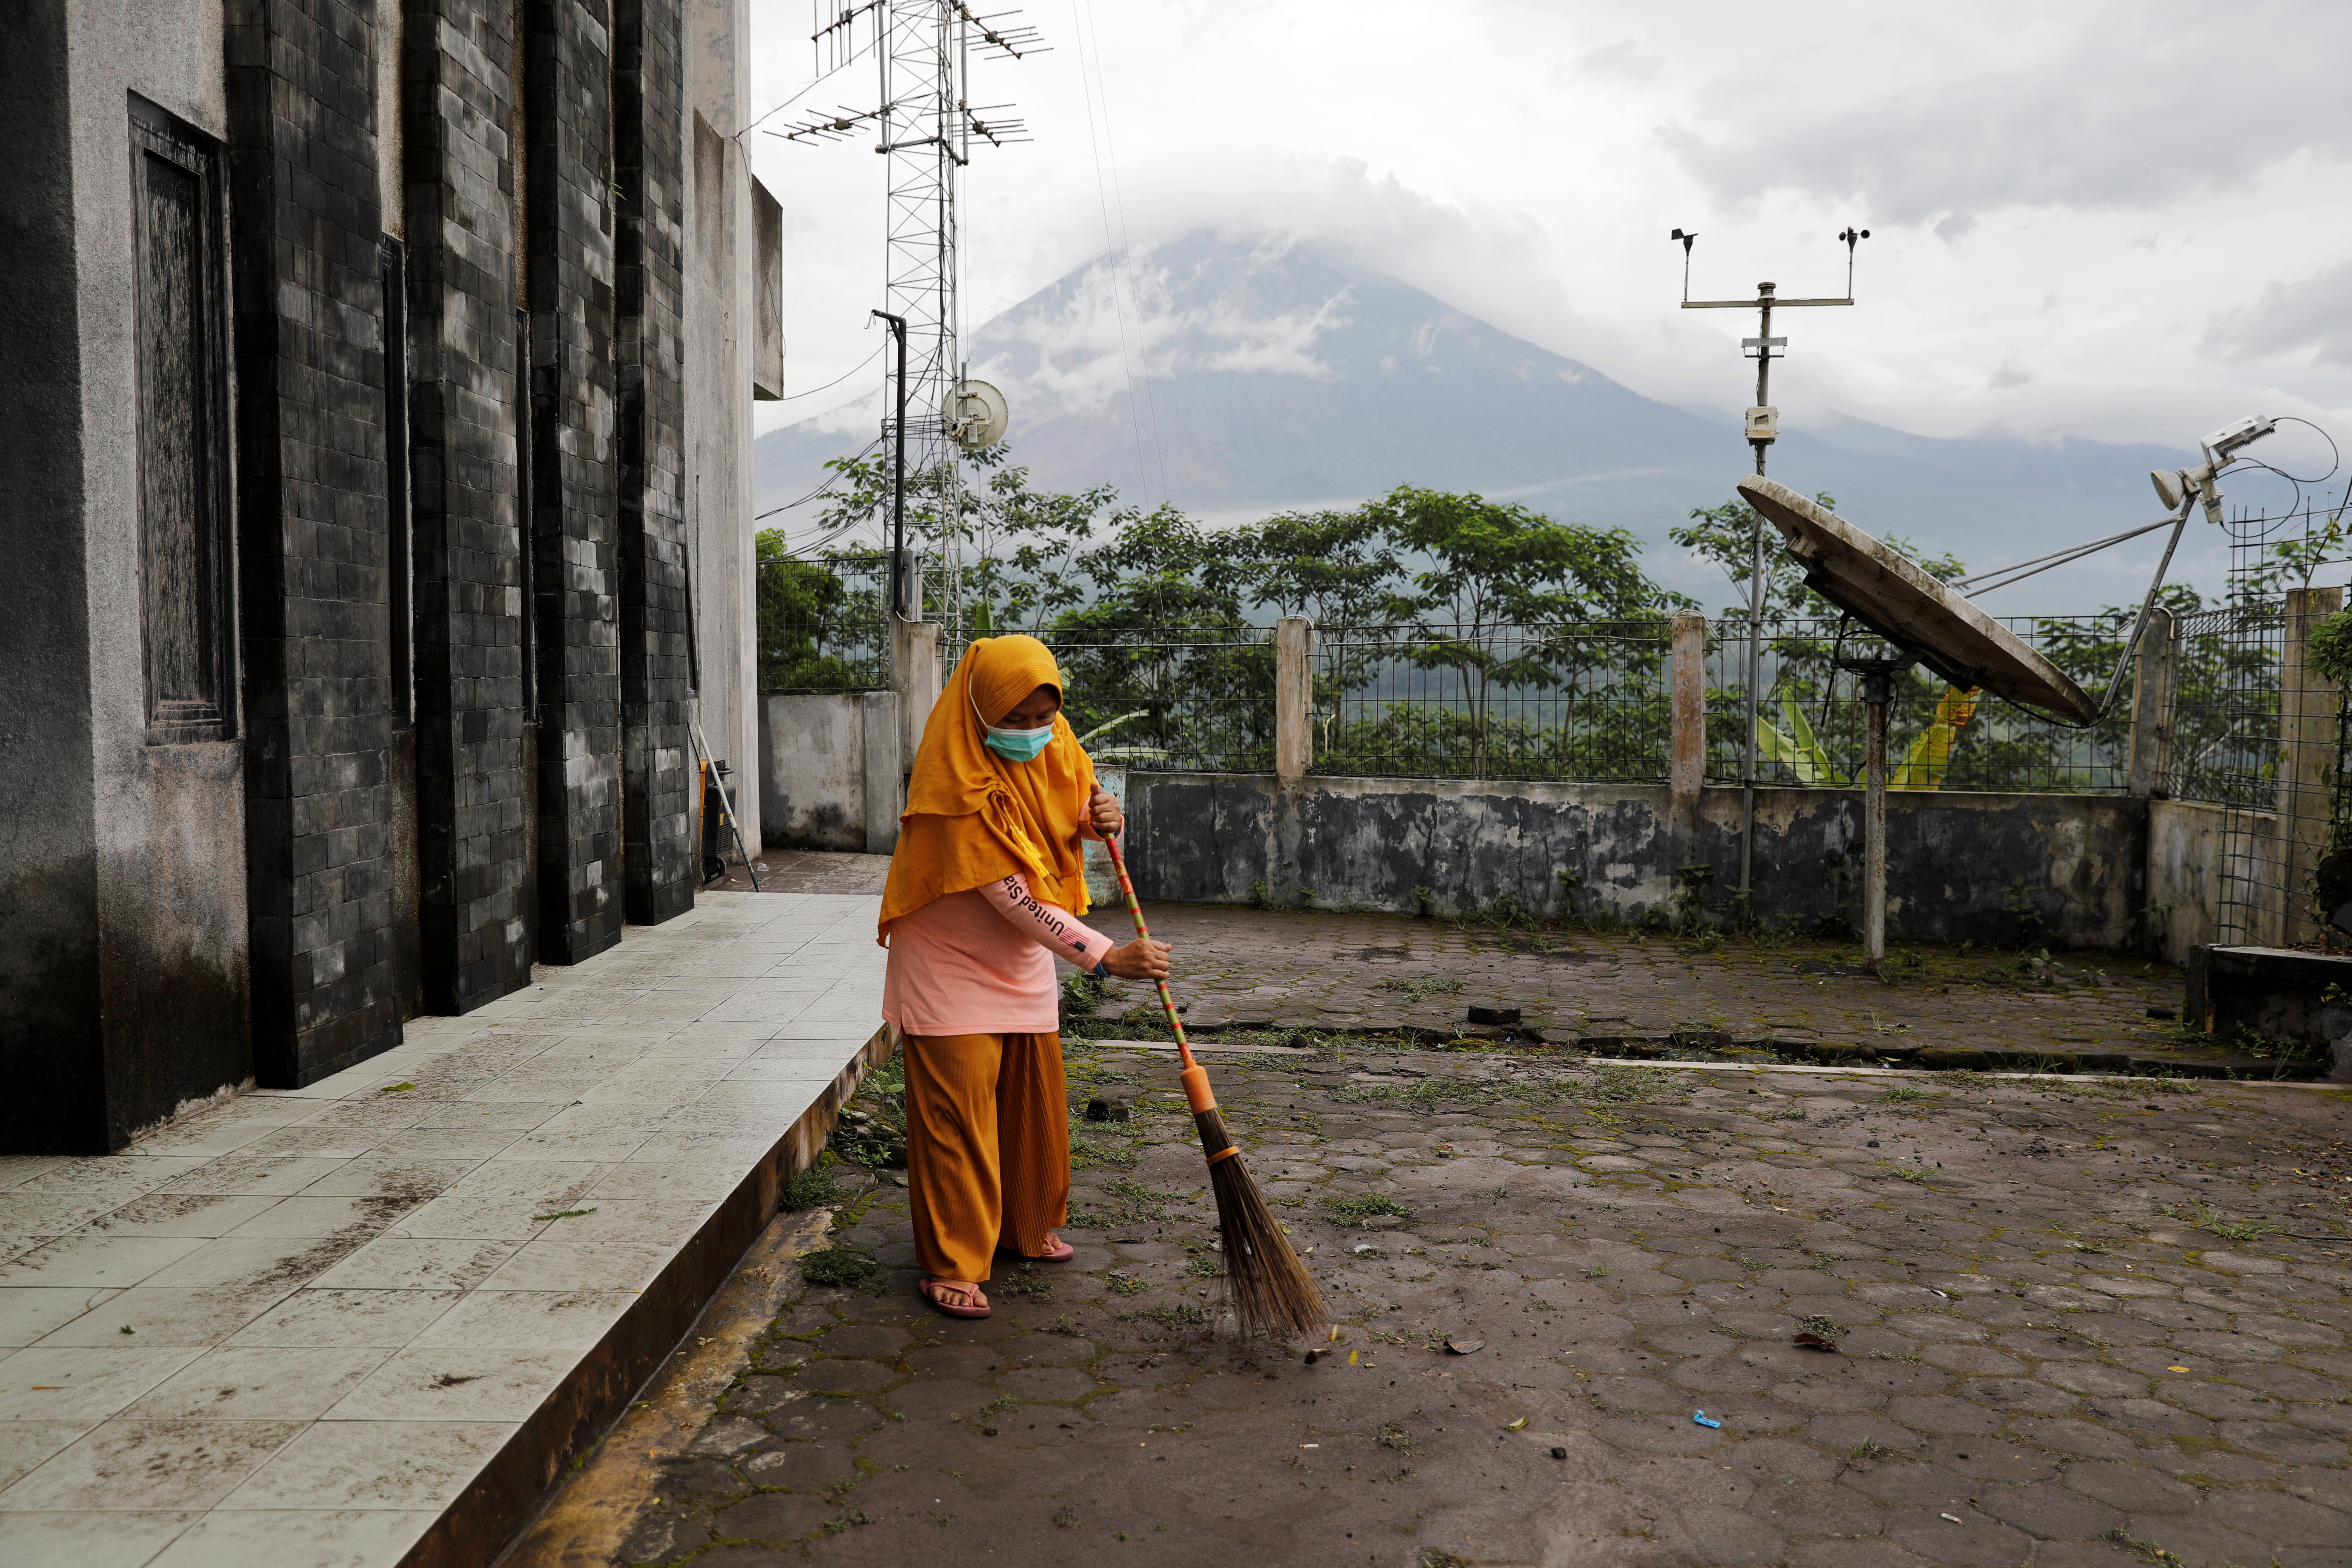 Herni, a 44-year-old local resident, sweeps ash on the ground as Mount Semeru volcano continues to spew ash and smoke, in Candipuro district, Lumajang regency, Indonesia